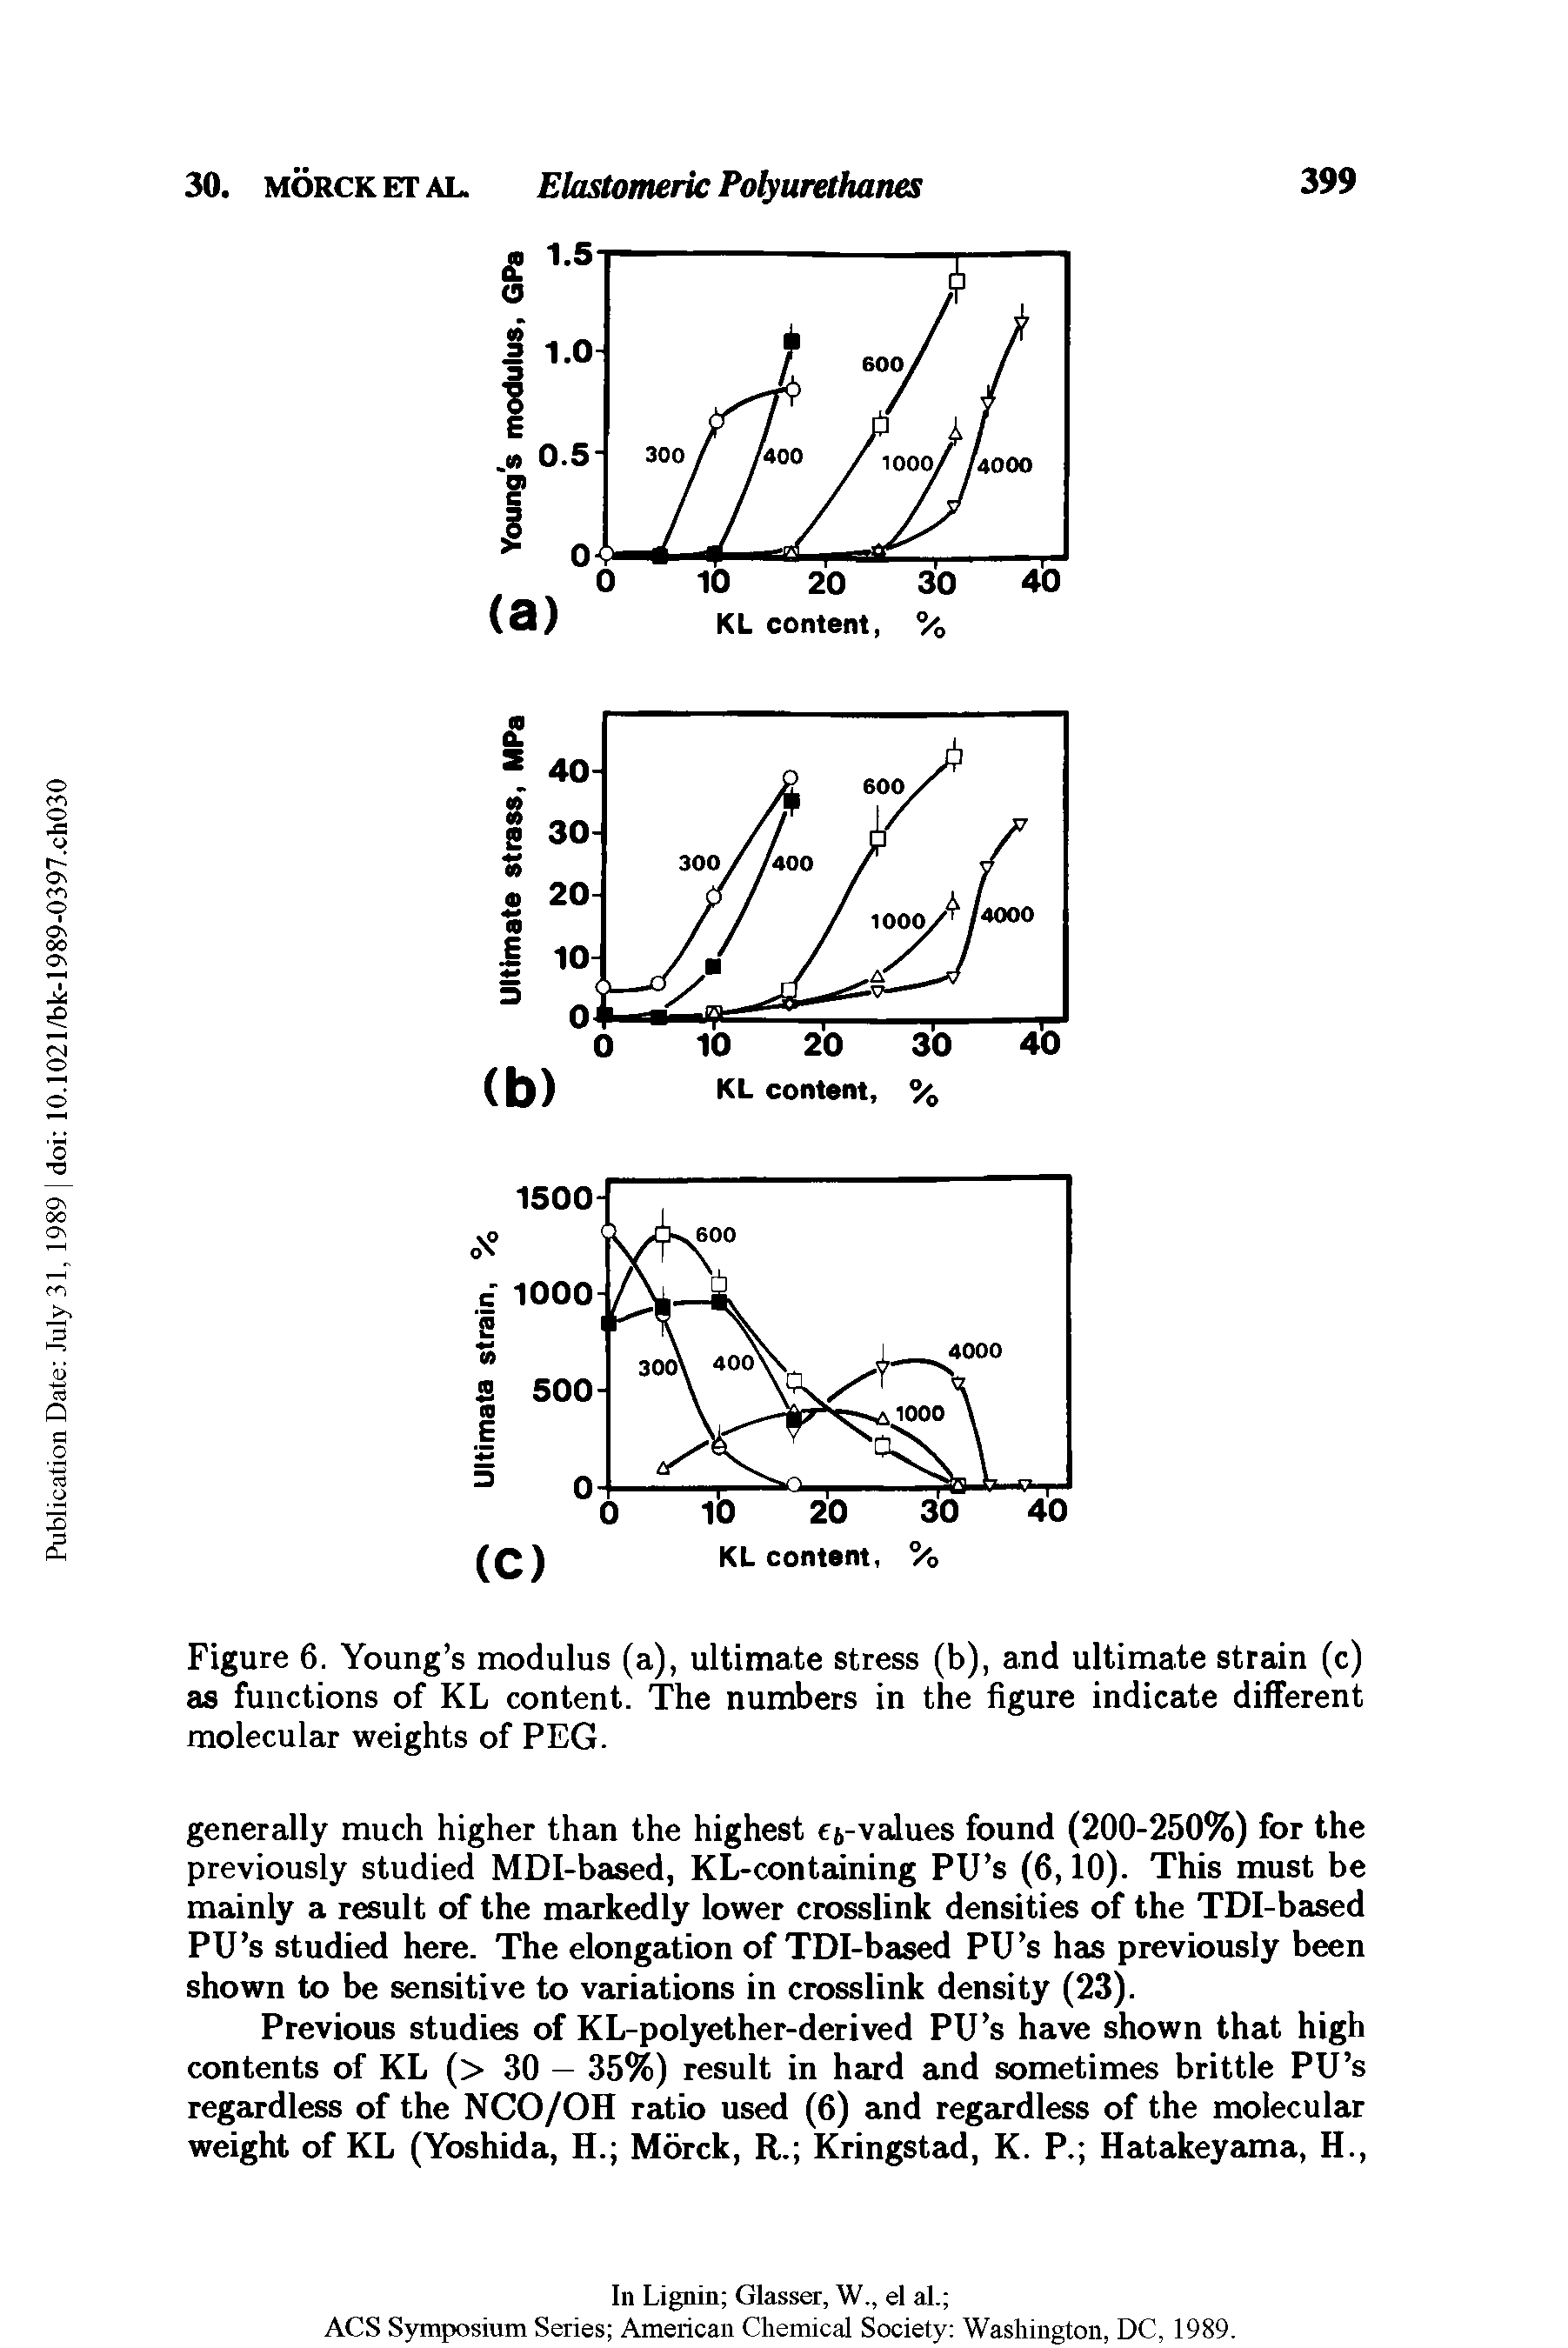 Figure 6. Young s modulus (a), ultimate stress (b), and ultimate strain (c) as functions of KL content. The numbers in the figure indicate different molecular weights of PEG.